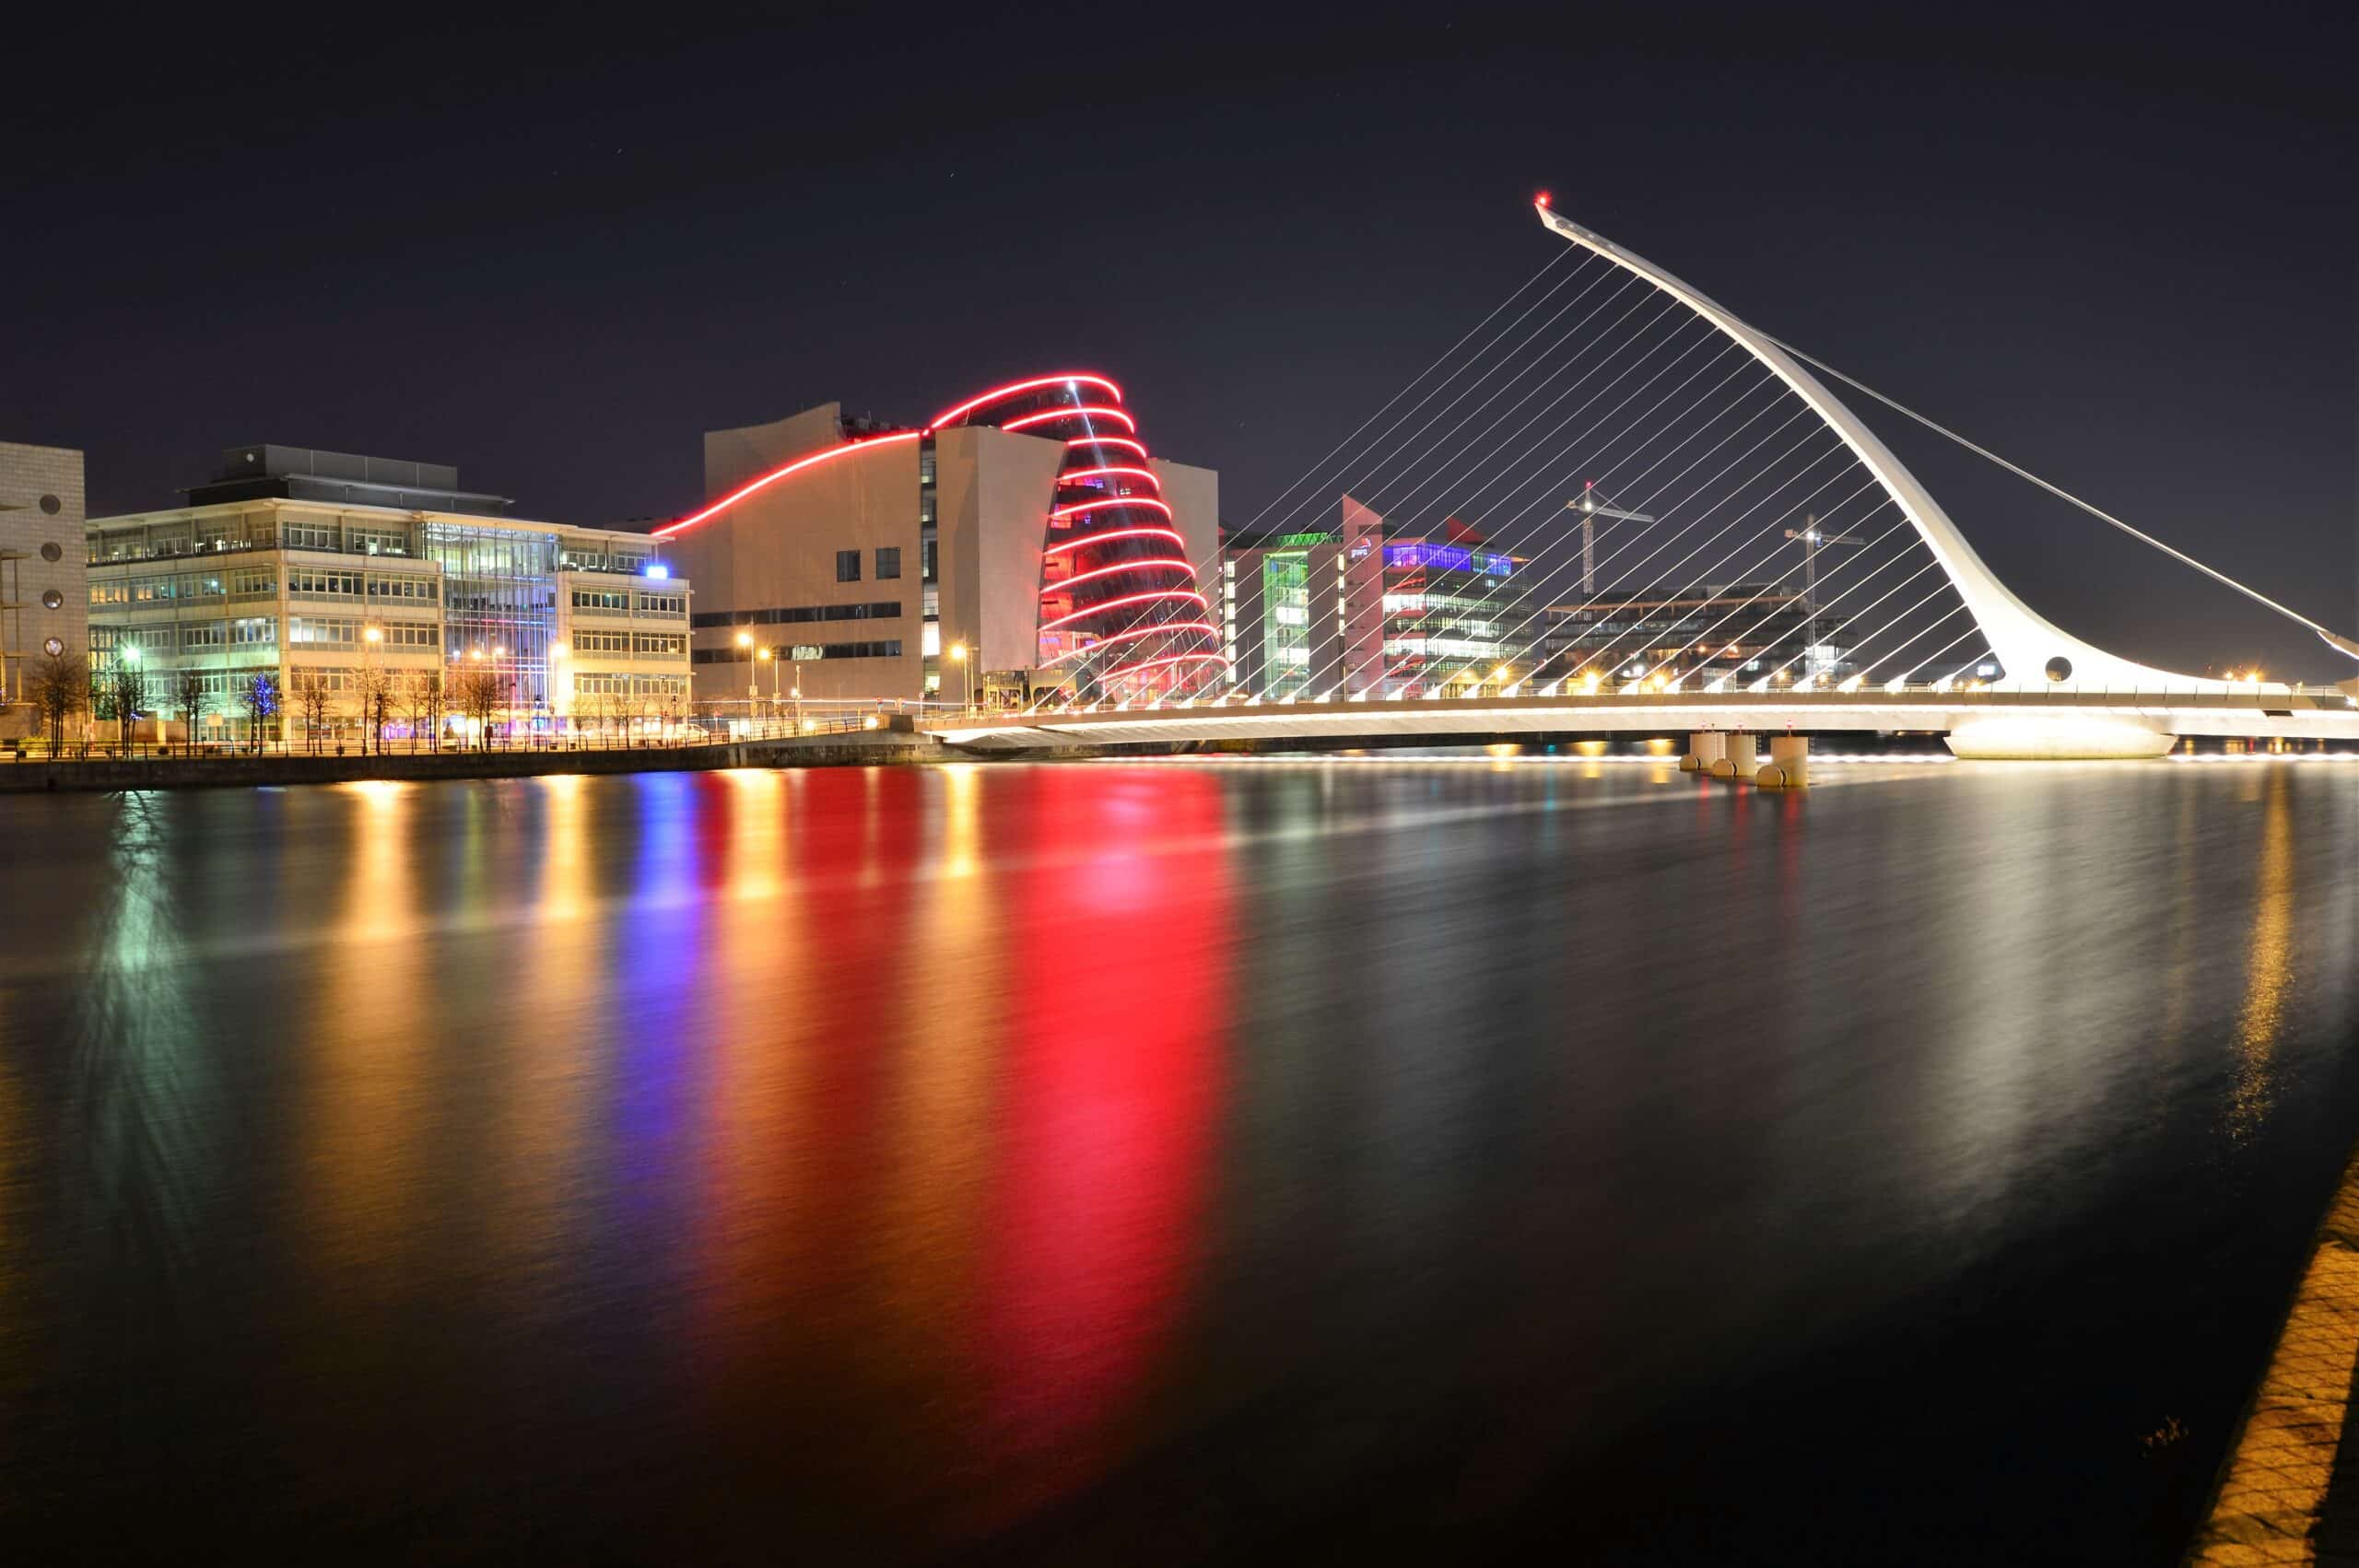 Long exposure photo showing the silhouette of the Convetion Centre, Dublin over the River Liffey at night. Also features The Samuel Beckett bridge.